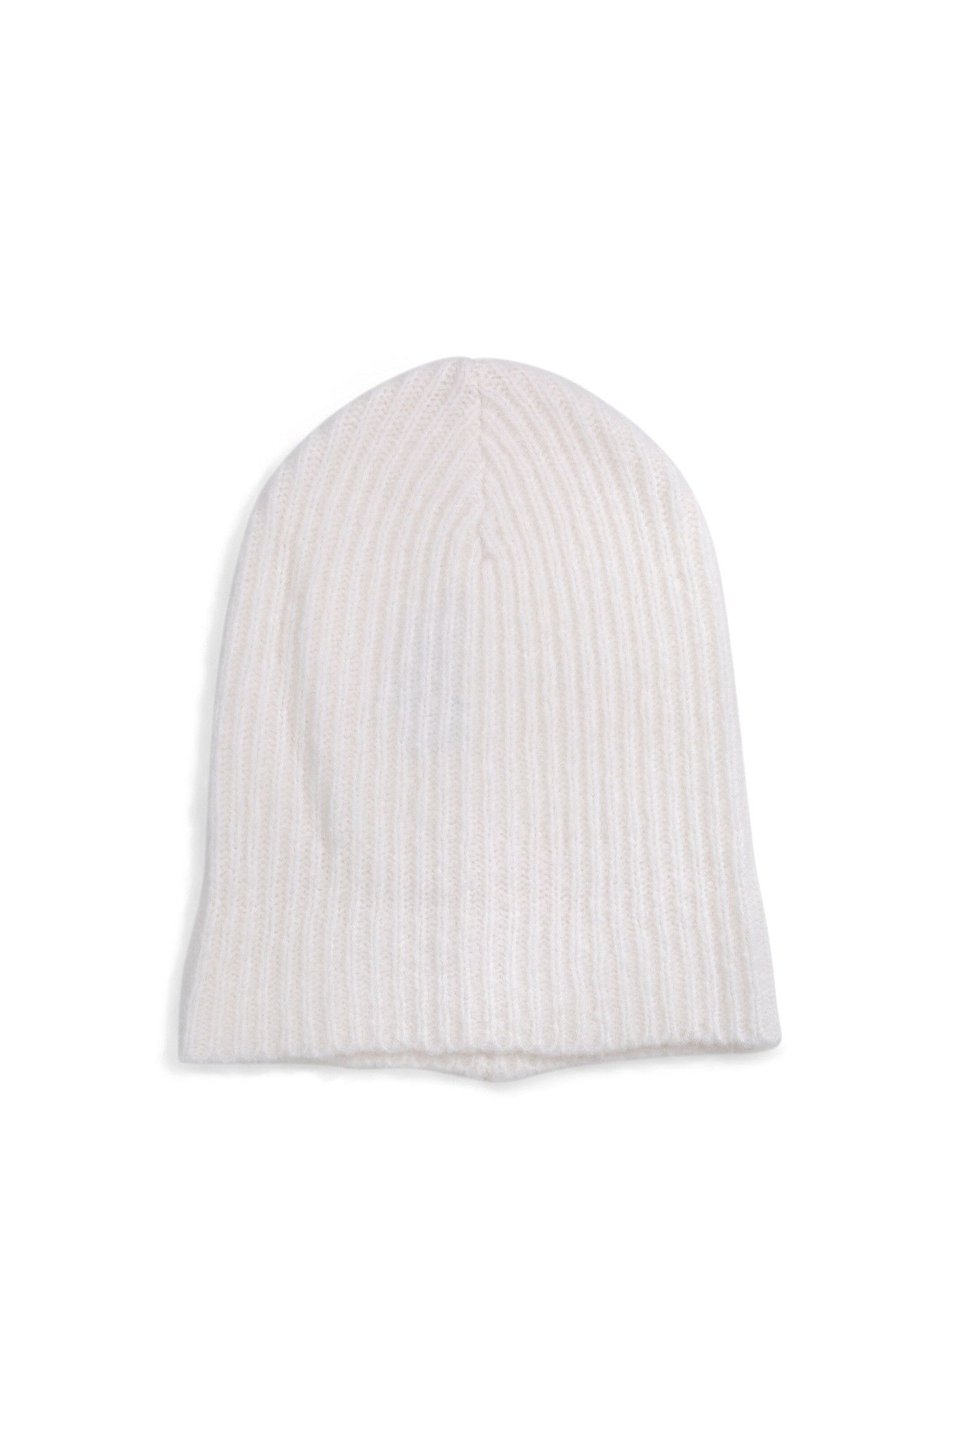 One & Other Nimbo Hat - Off White